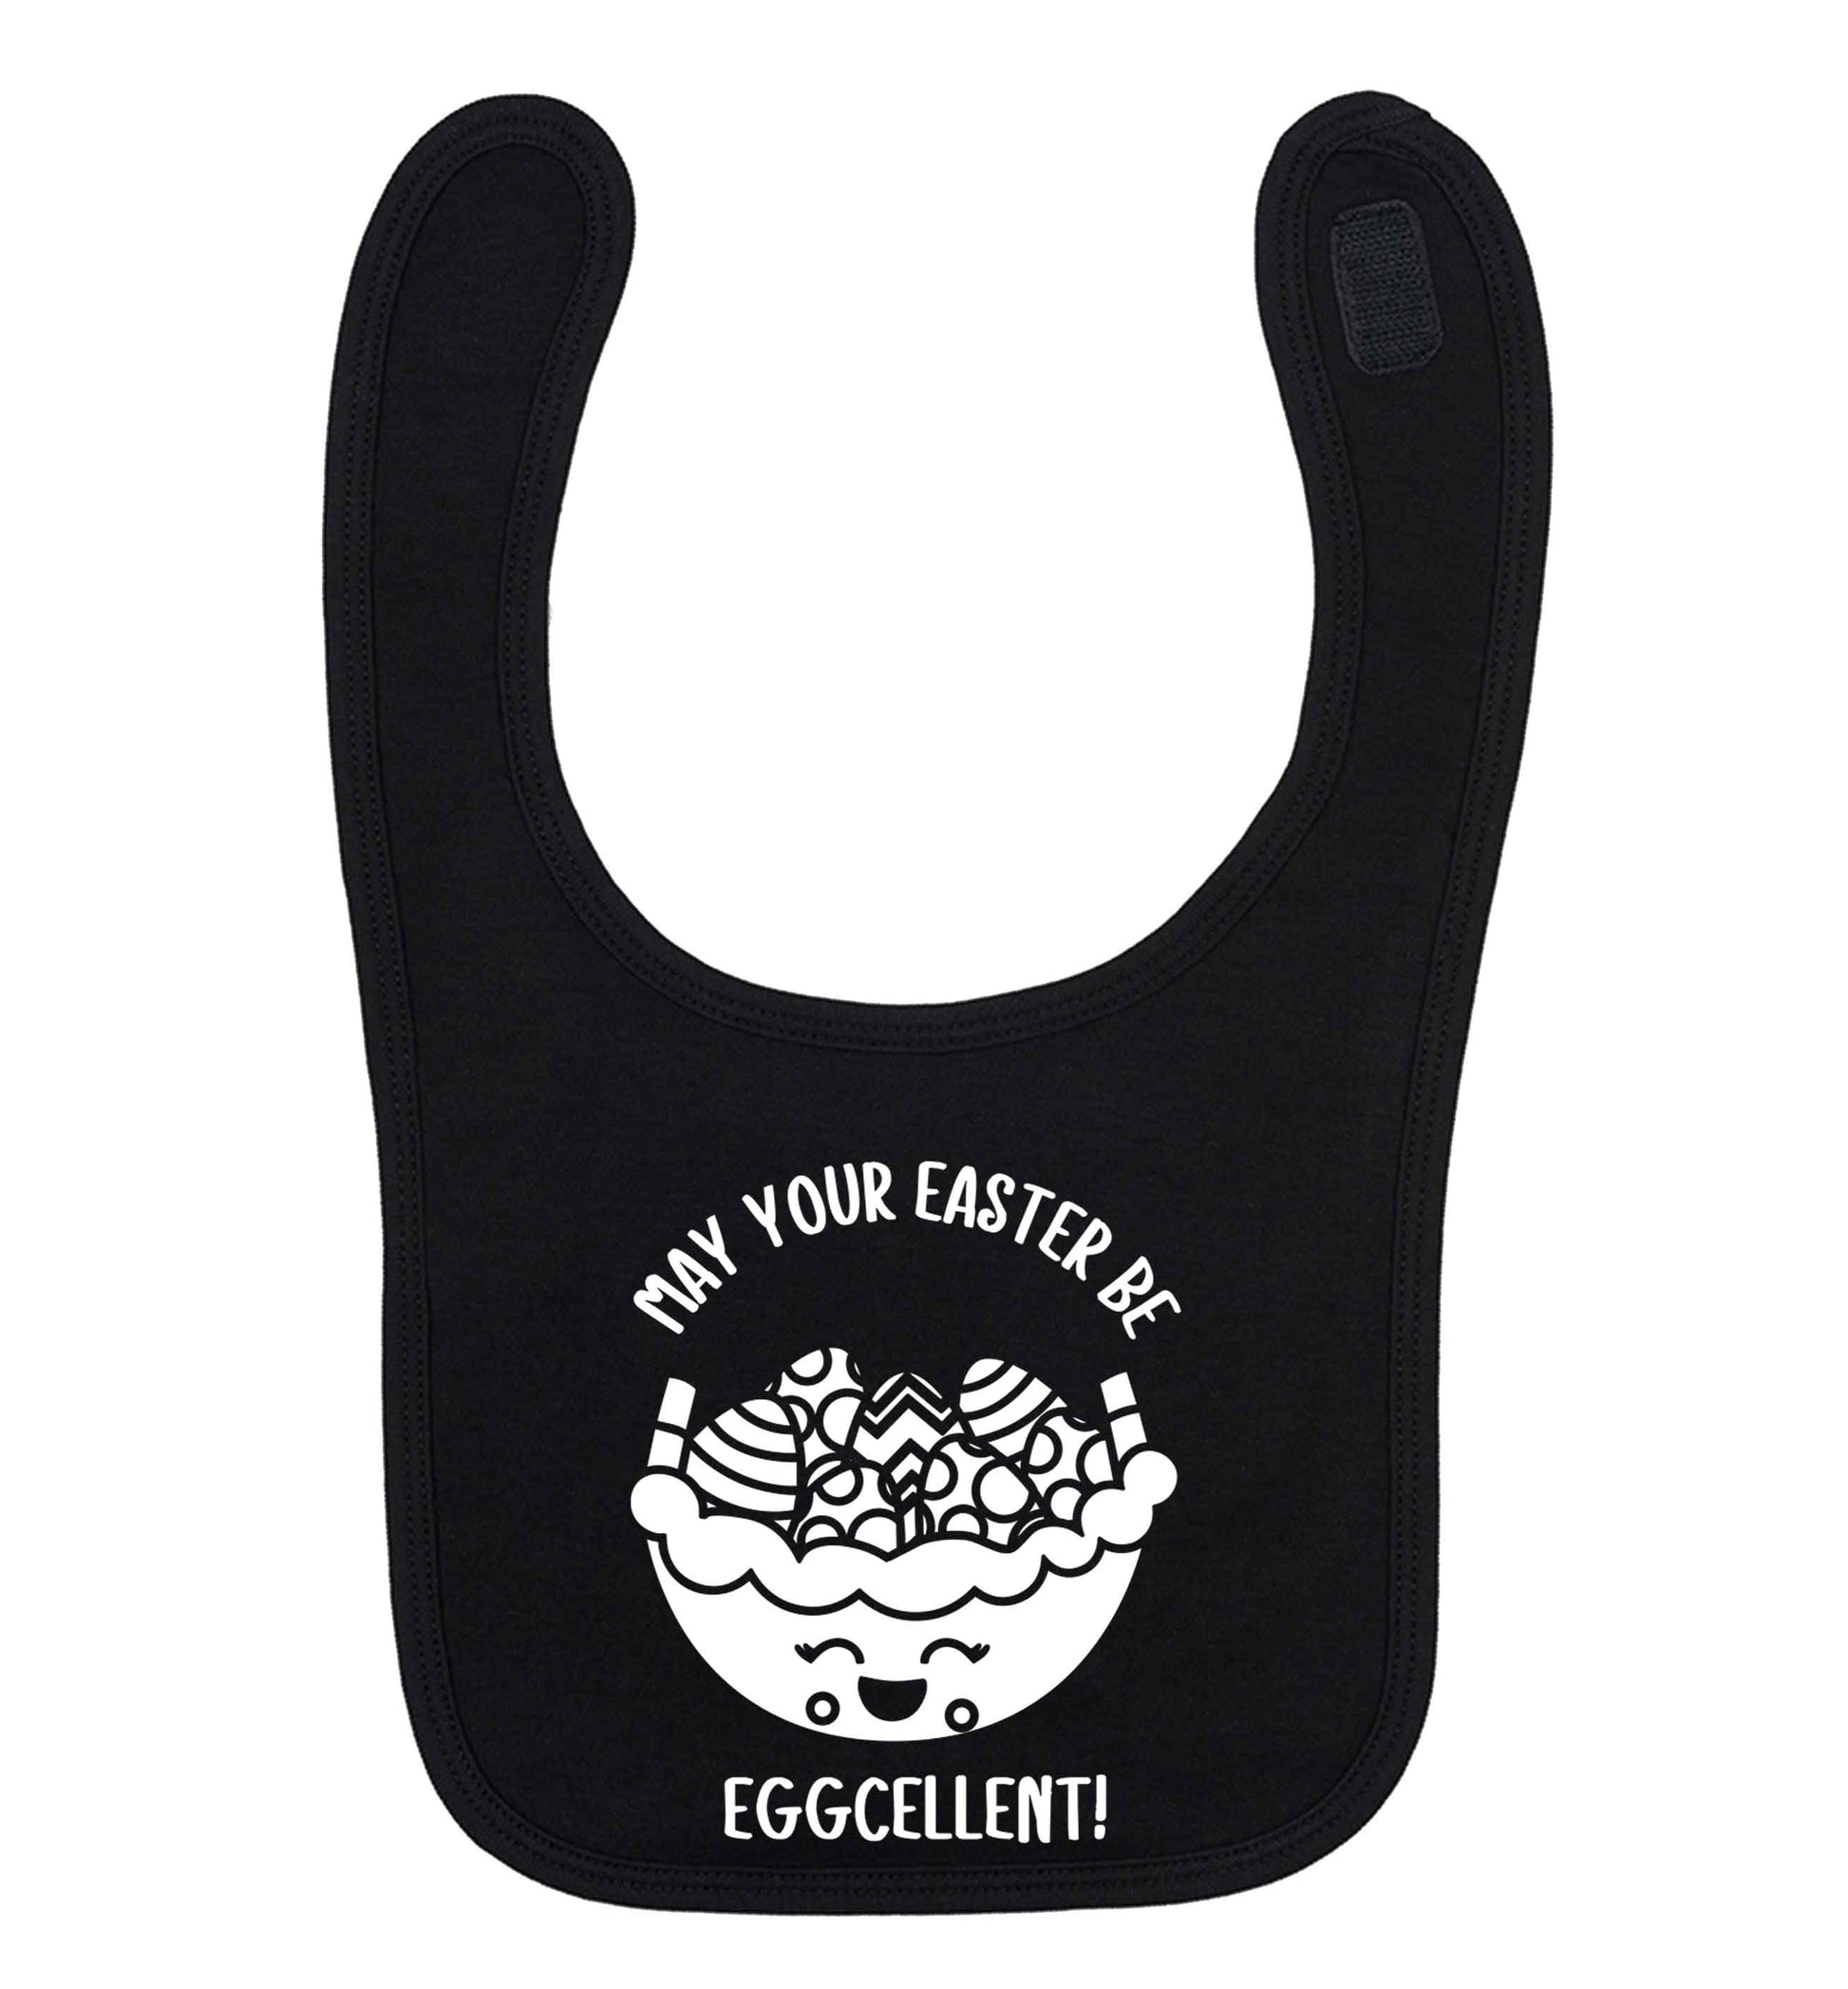 May your Easter be eggcellent black baby bib